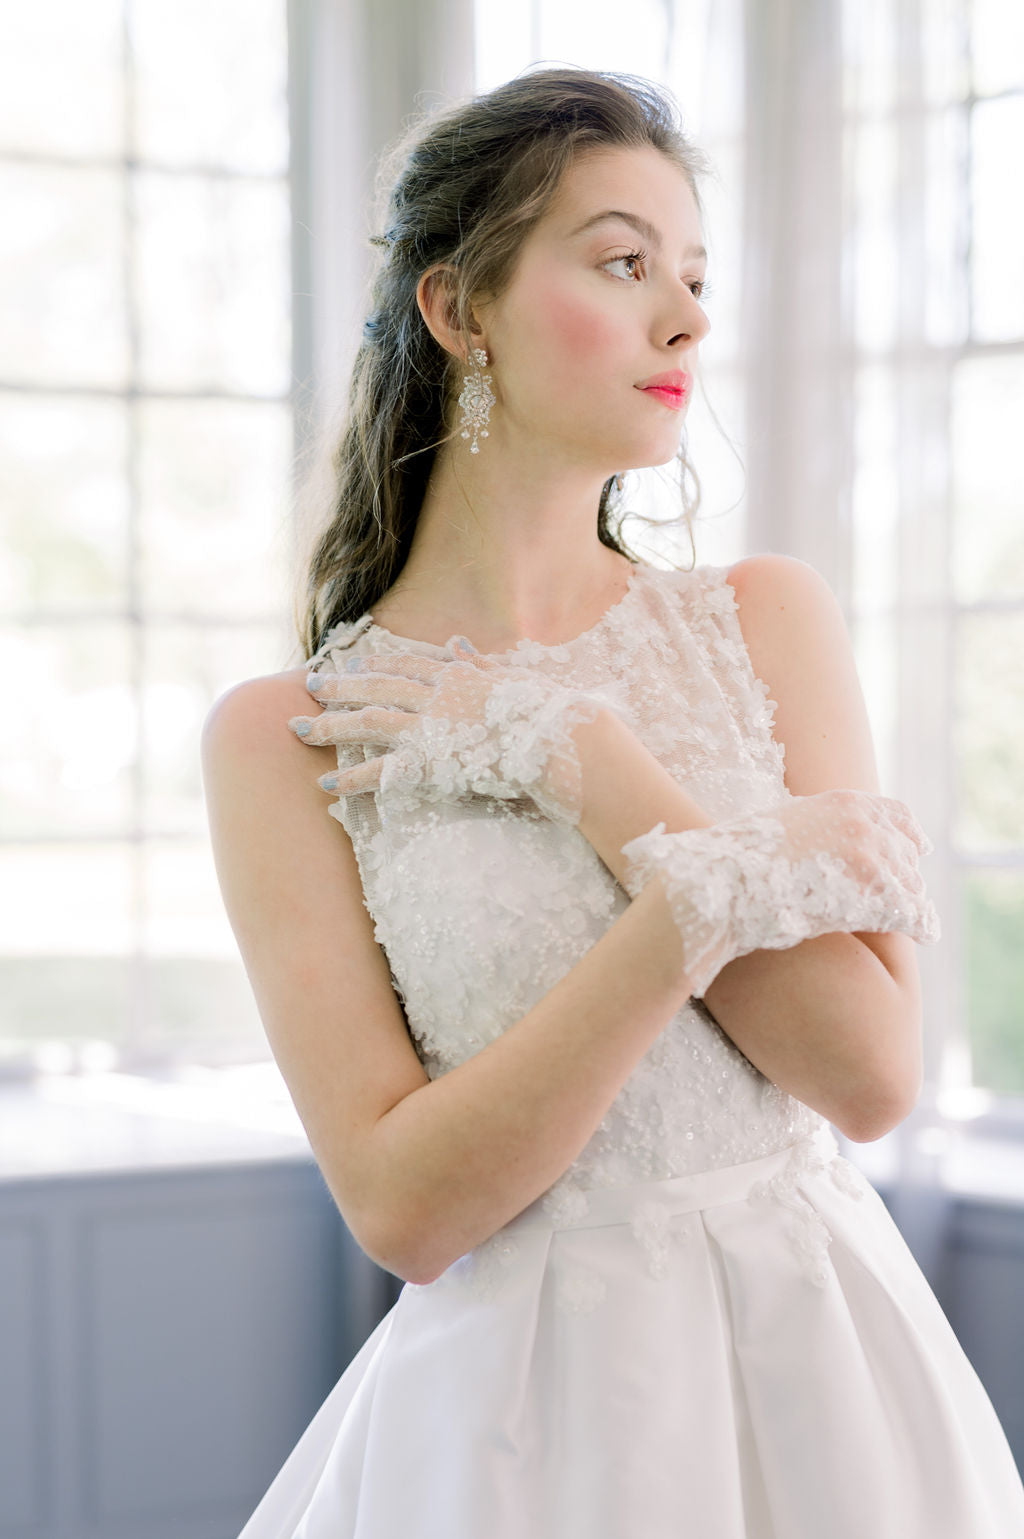 Ann by Catherine Langlois. Timeless silk Mikado wedding dress with 3D lace. Handmade to order in Toronto, Ontario, Canada.